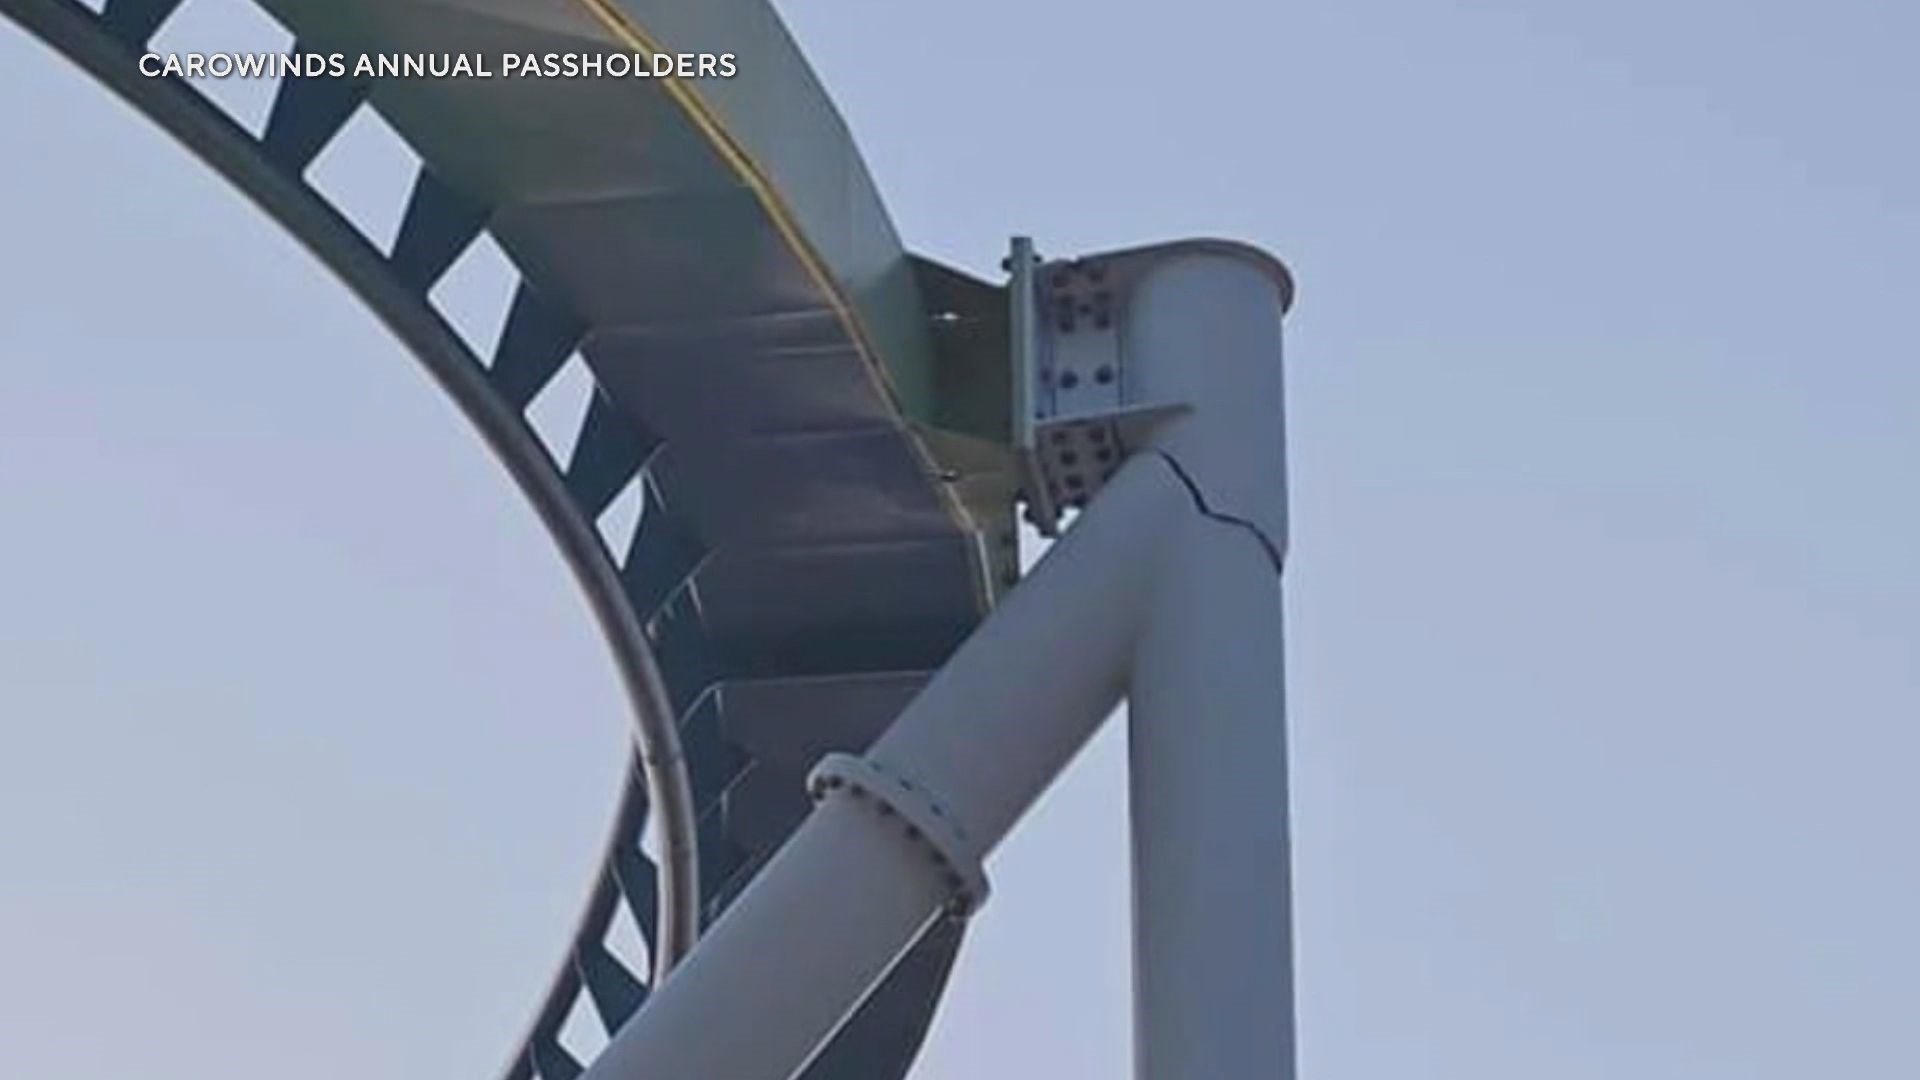 Carowinds officials confirmed that the Fury 325 roller coaster has reopened after it closed for weeks following the discovery of a crack in a support beam.